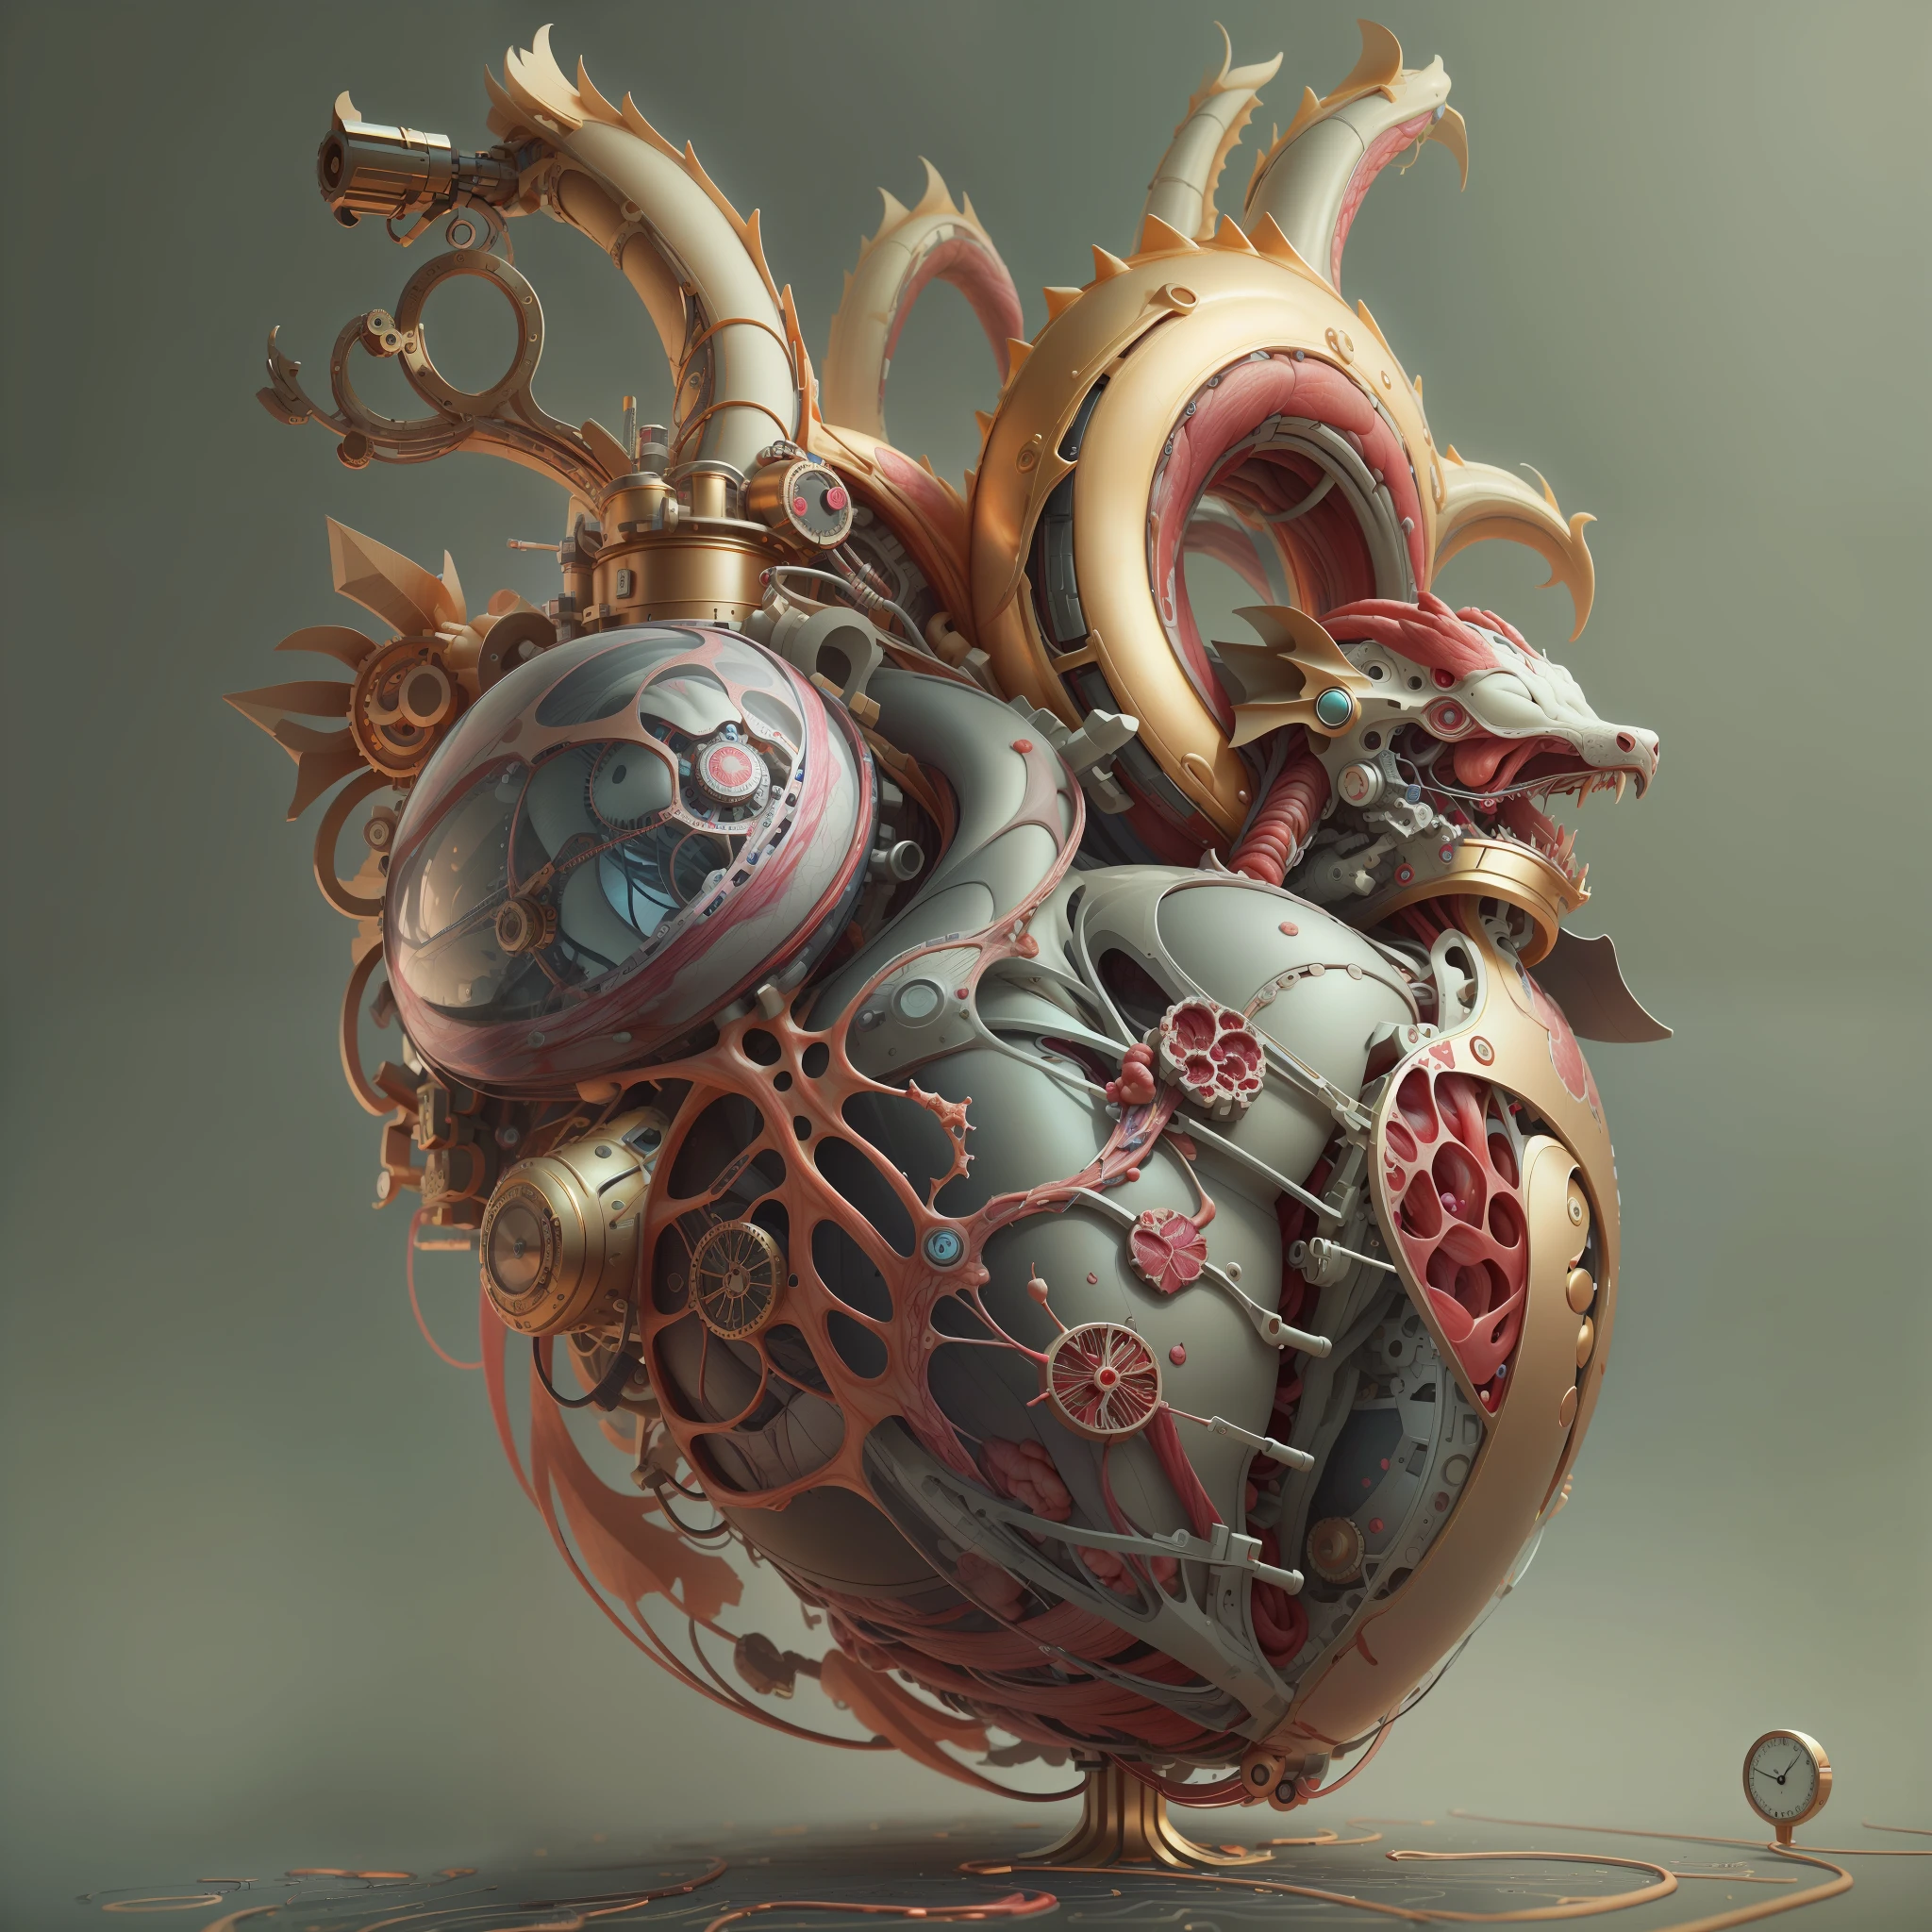 best qualtiy，tmasterpiece，Ultra-high resolution，（realisticlying：1.4），absurderes，intriguing，High color saturation，1 heart，3D Anatomy，Glow-emitting pulsating veins，sci-fy，3D mechanical biological heart， fanciful，Beautiful 3D human heart decoration design，hisui/Gold and Copper/The golden dragon/Mechanical dial/Embedded in the heart of a living creature，BiopunkAI